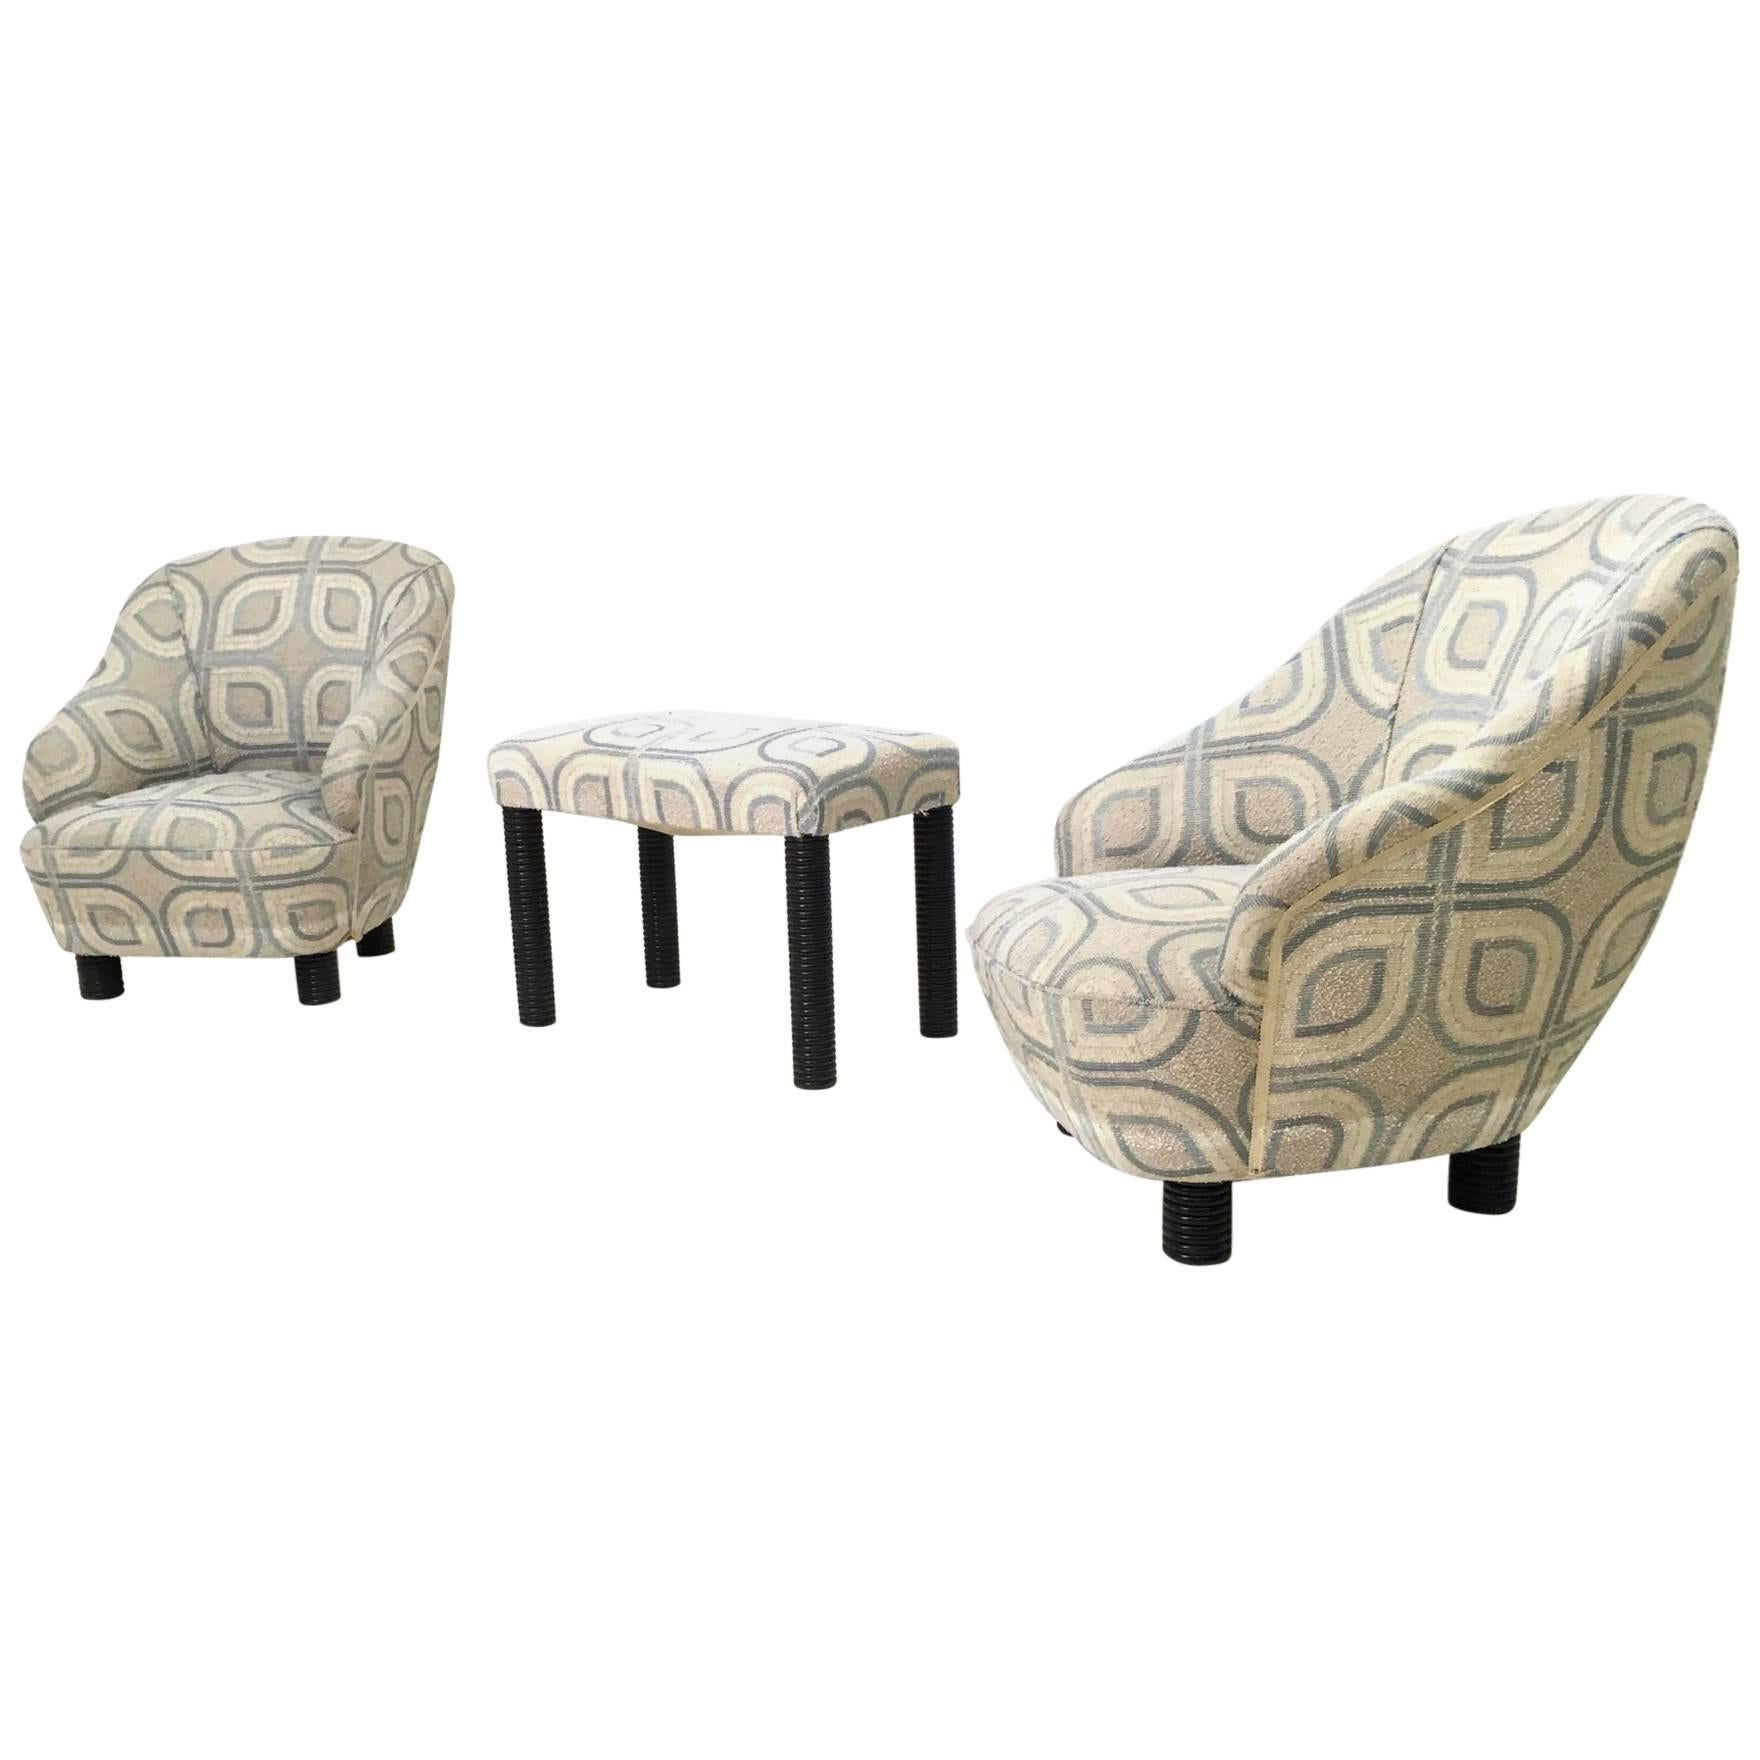 Pair of Armchairs and an Ottoman by Gio Ponti, Italy, 1930s